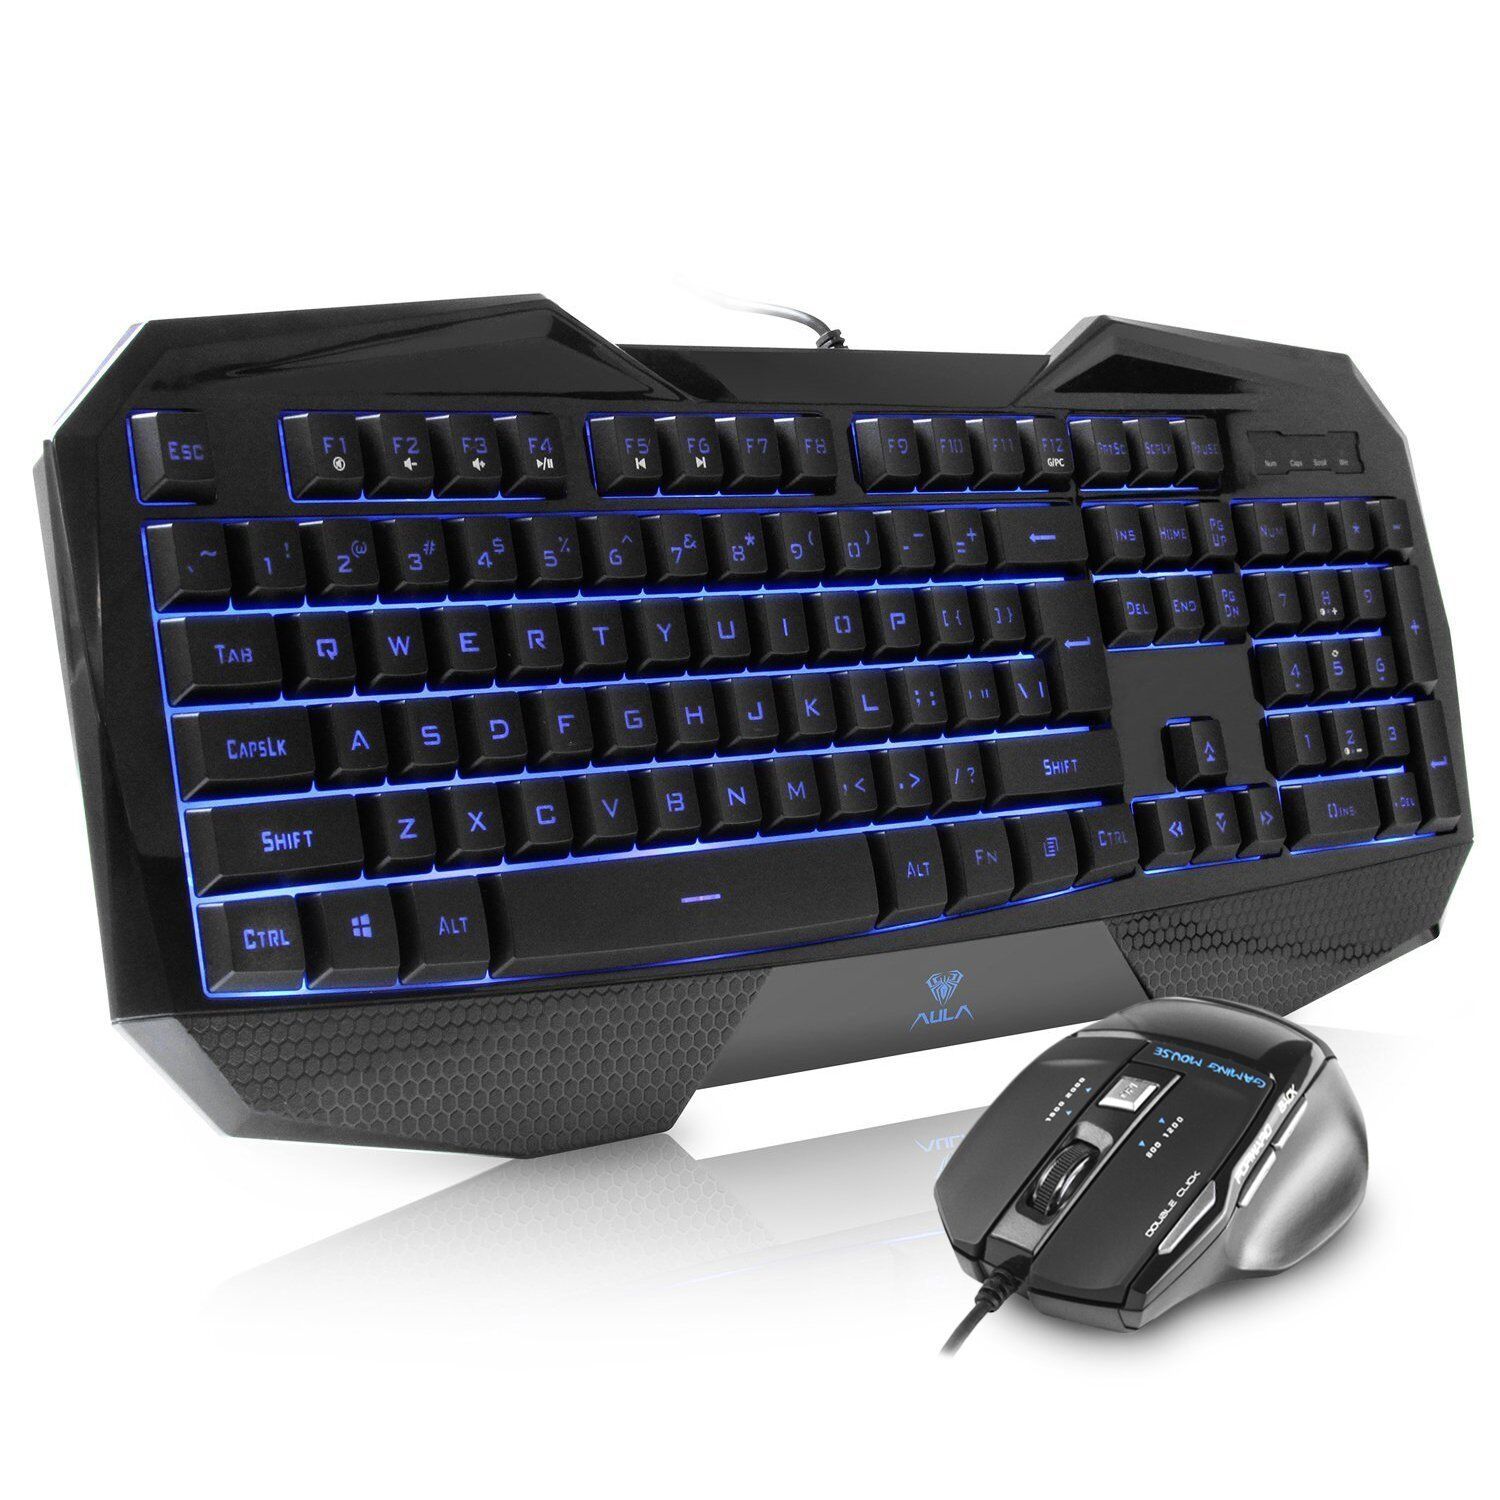 Beastron Backlit Gaming Keyboard and Mouse Combo with Adjustable DPI for Gamers